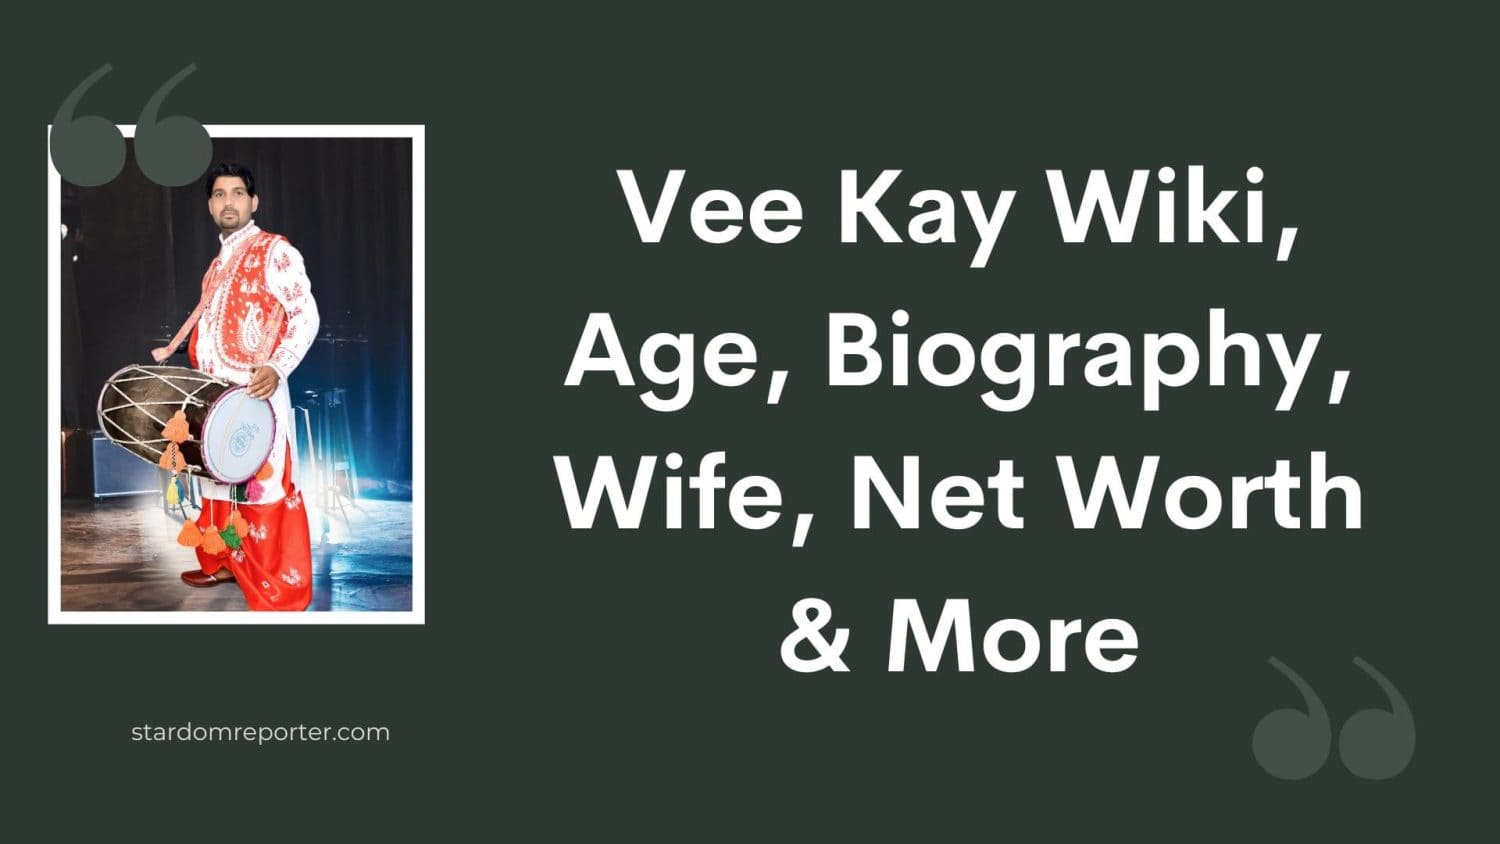 Vee Kay Wiki, Age, Biography, Wife, Net Worth & More - 49